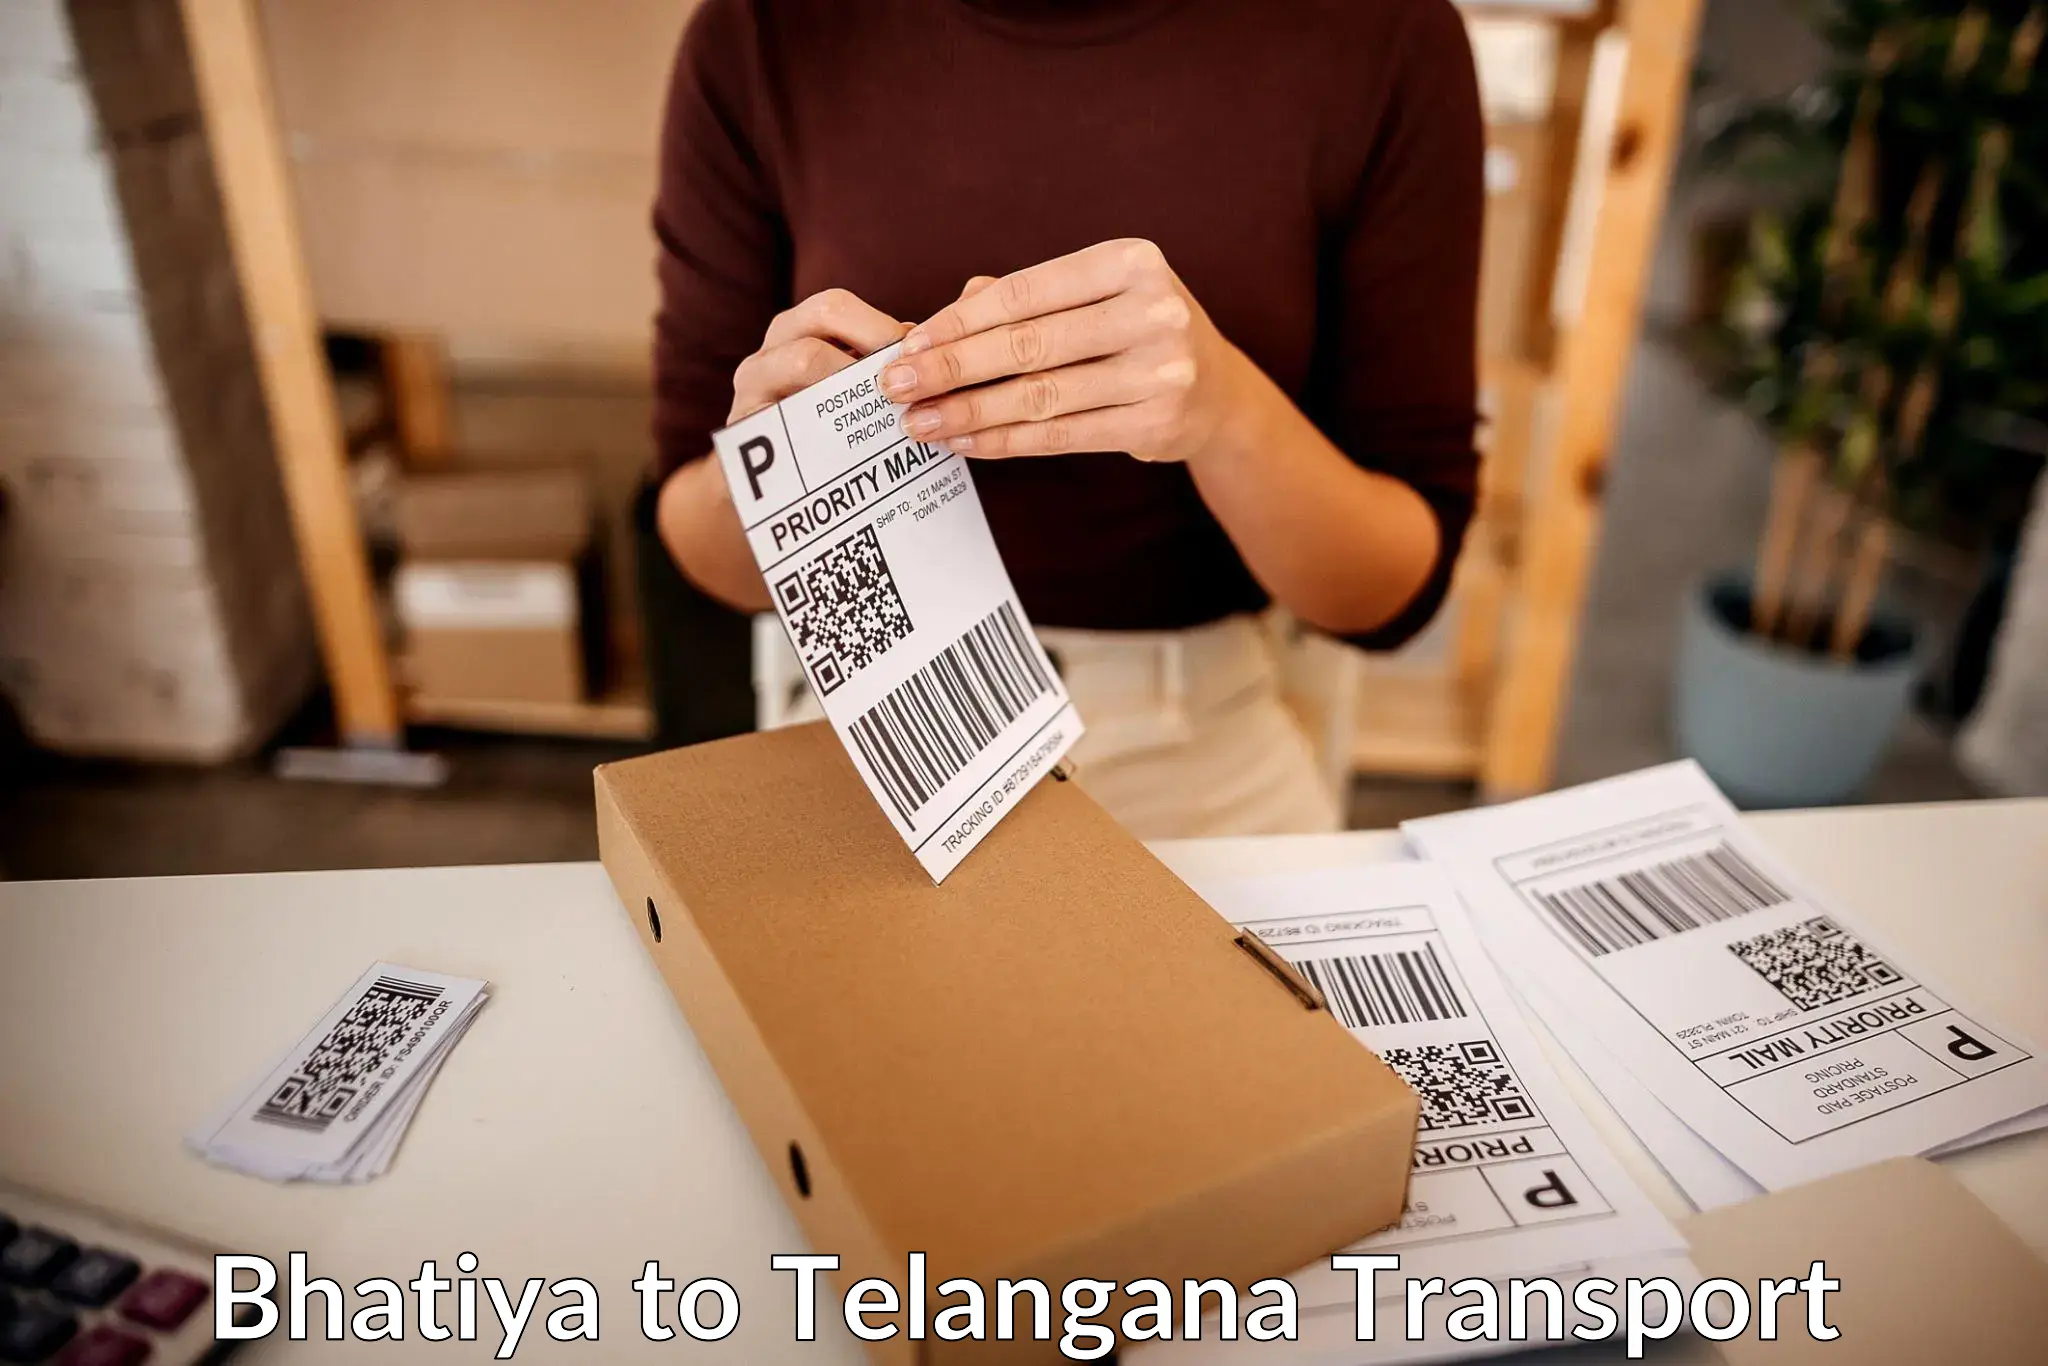 Daily parcel service transport in Bhatiya to Wanaparthy